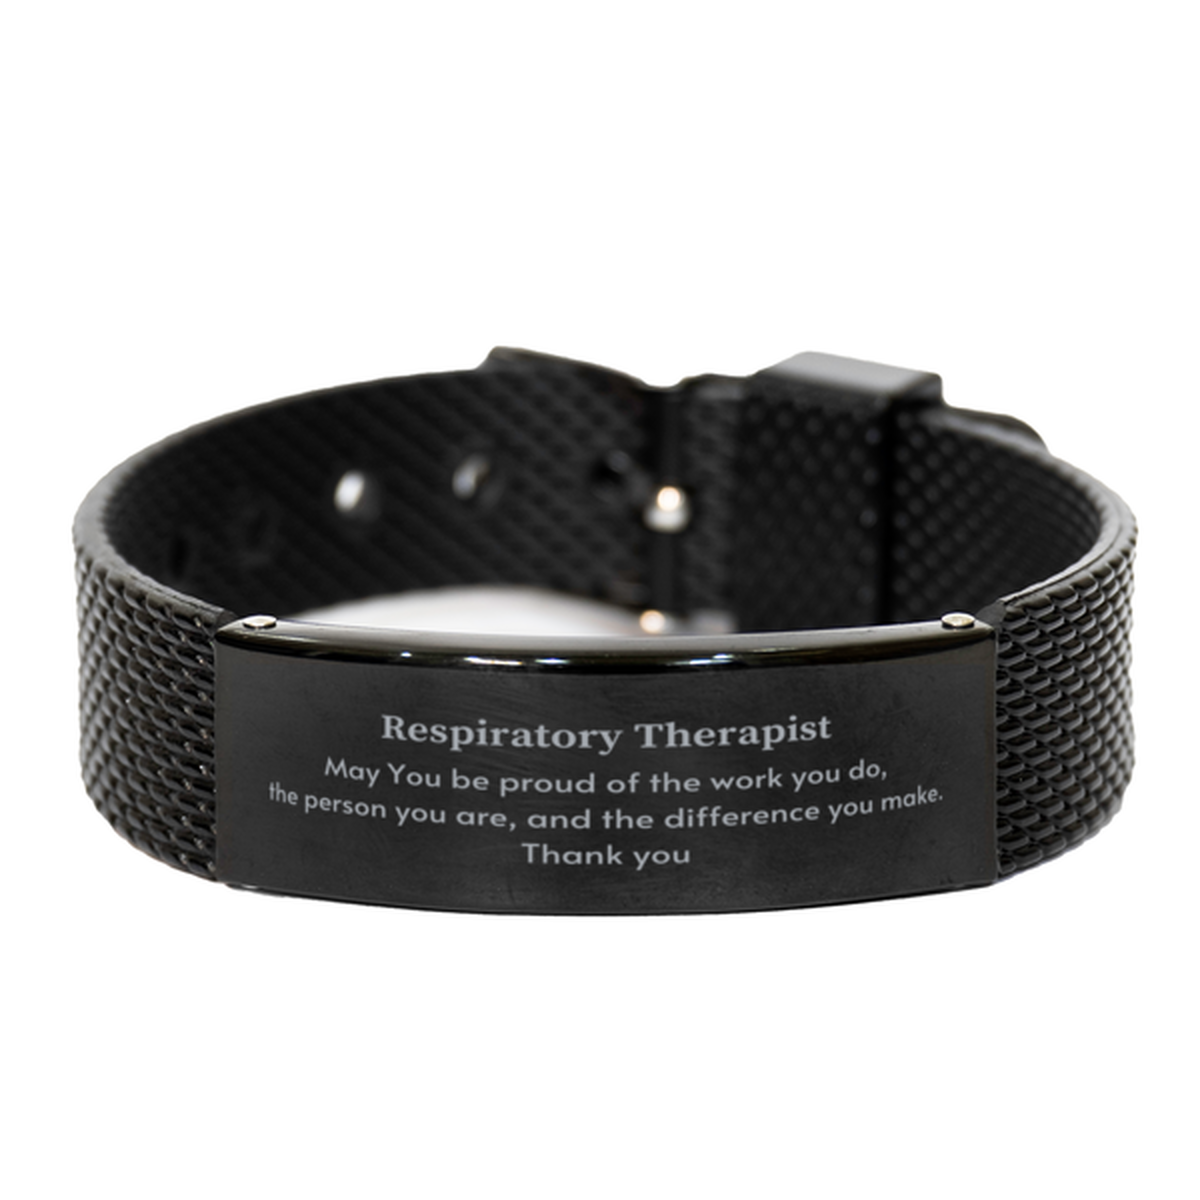 Heartwarming Black Shark Mesh Bracelet Retirement Coworkers Gifts for Respiratory Therapist, Respiratory Therapist May You be proud of the work you do, the person you are Gifts for Boss Men Women Friends